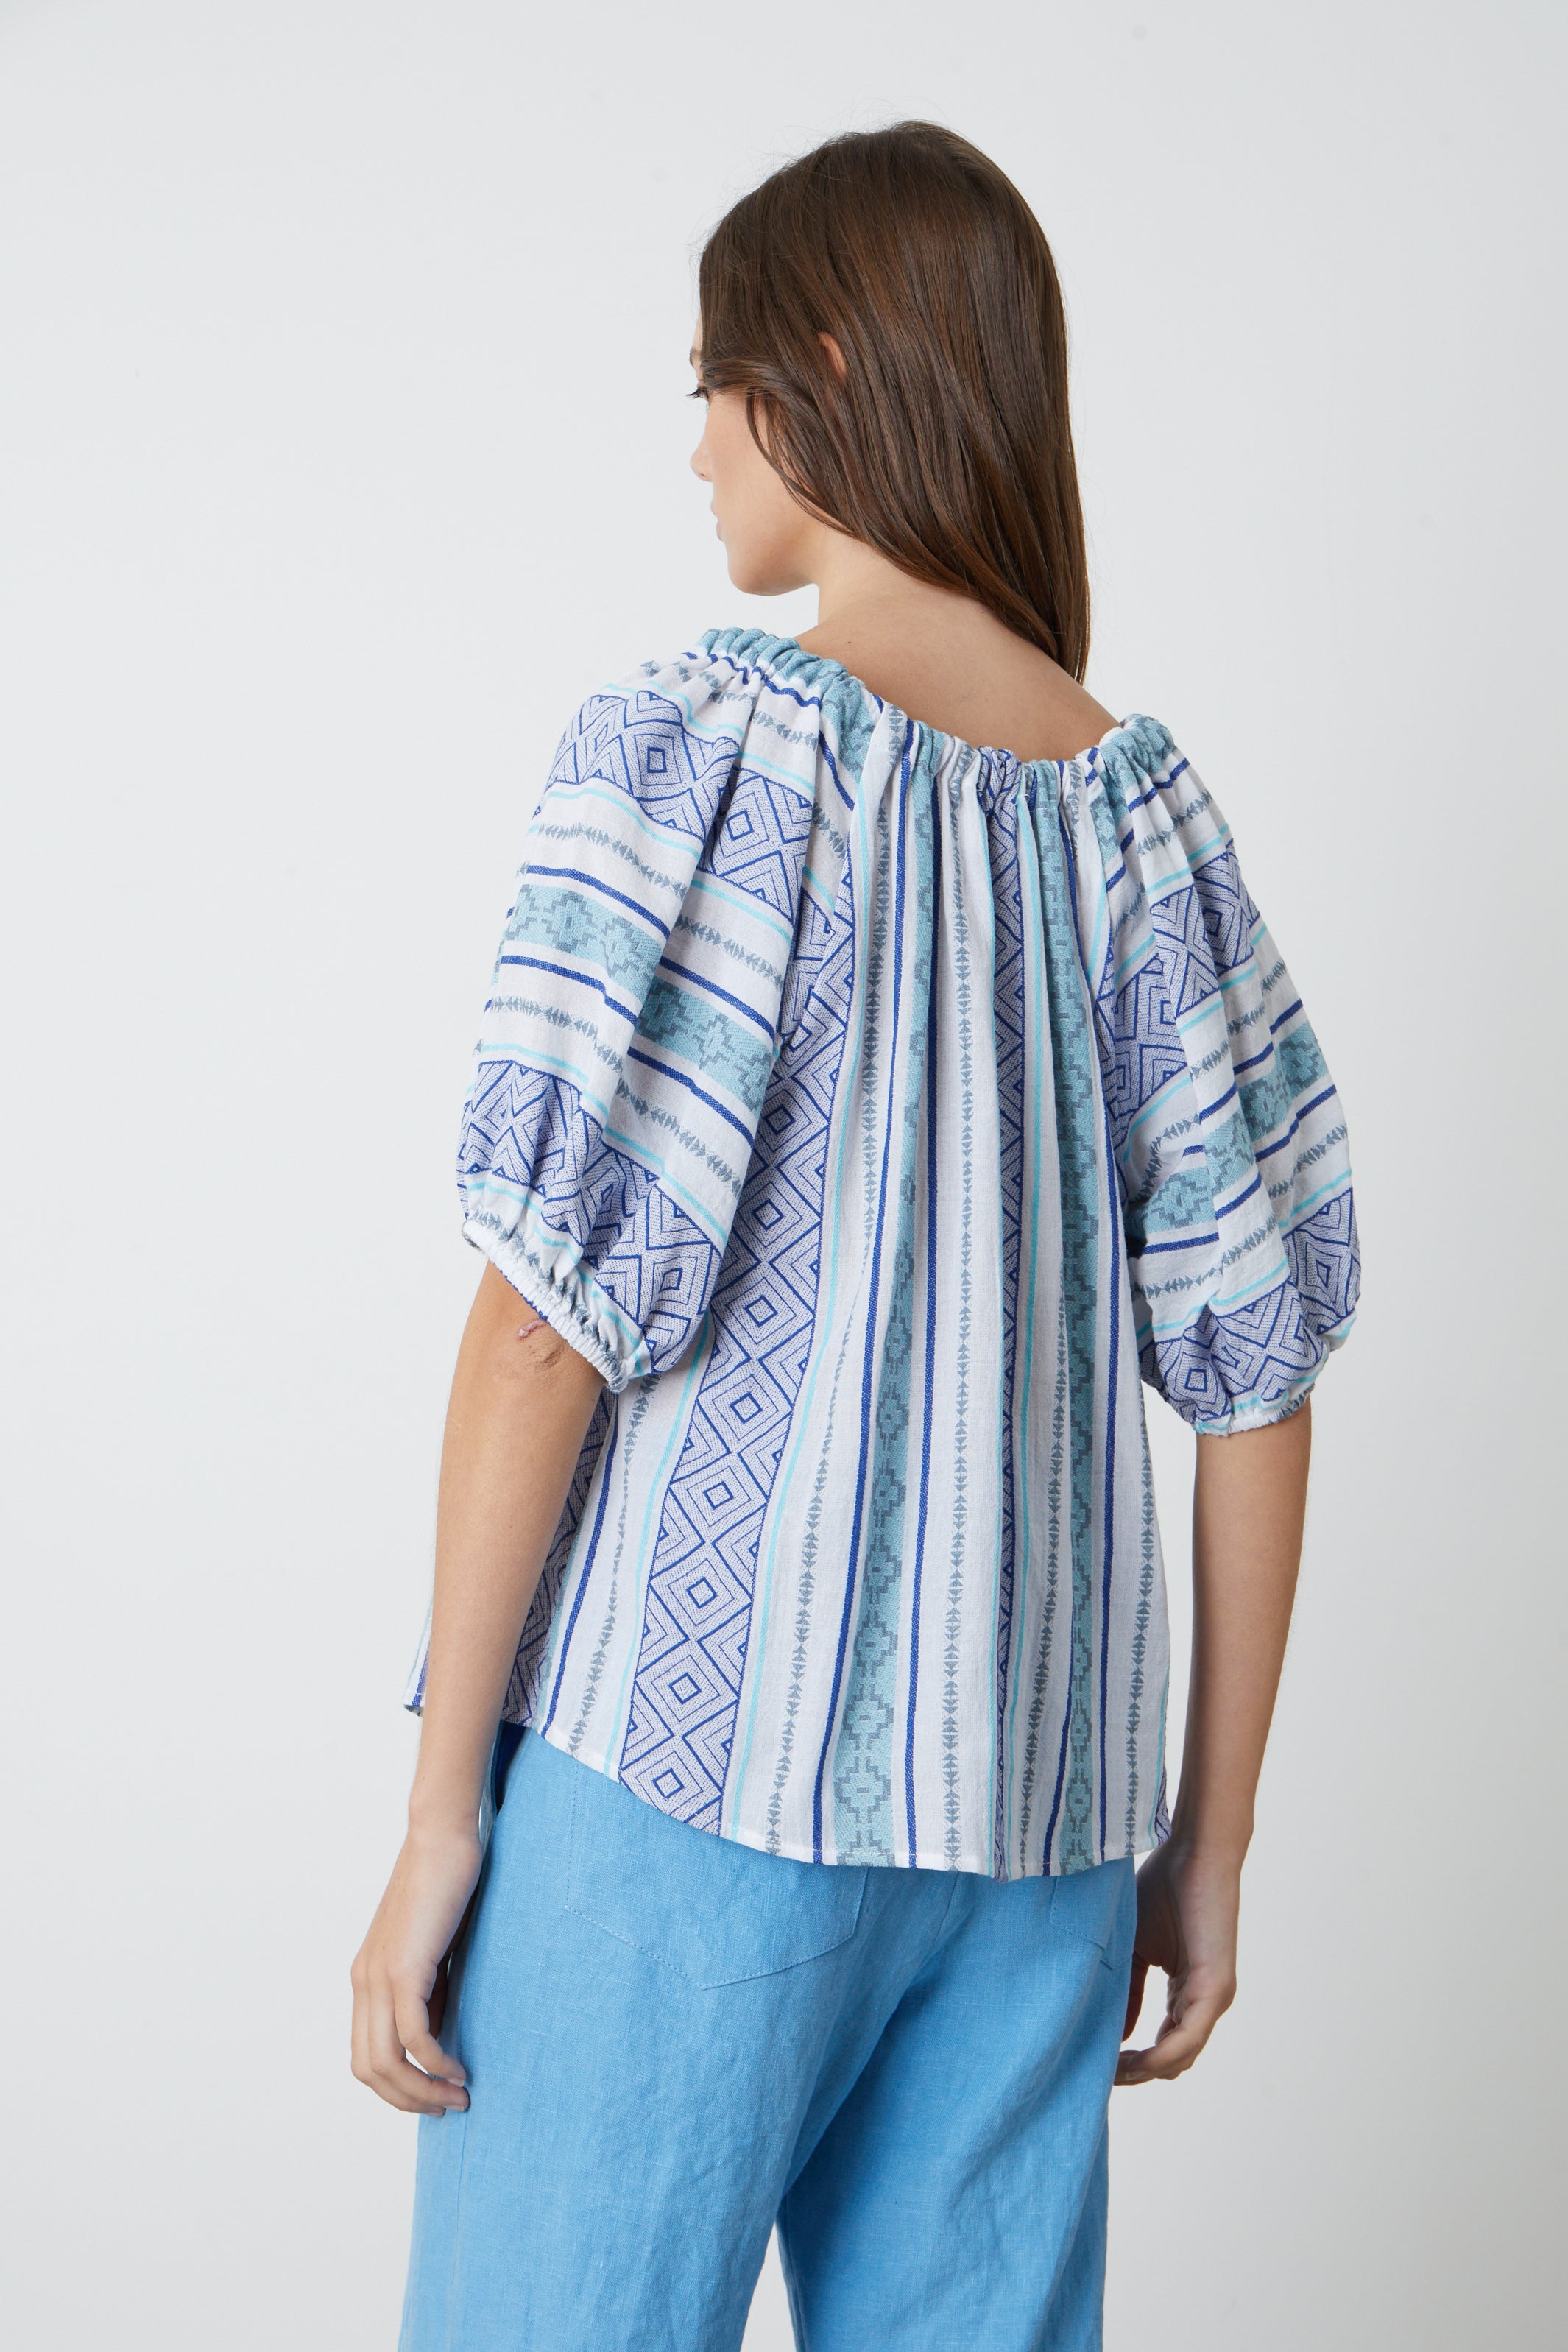   The back view of a woman wearing a Velvet by Graham & Spencer KIMMY JACQUARD BOHO TOP in blue and white jacquard print. 